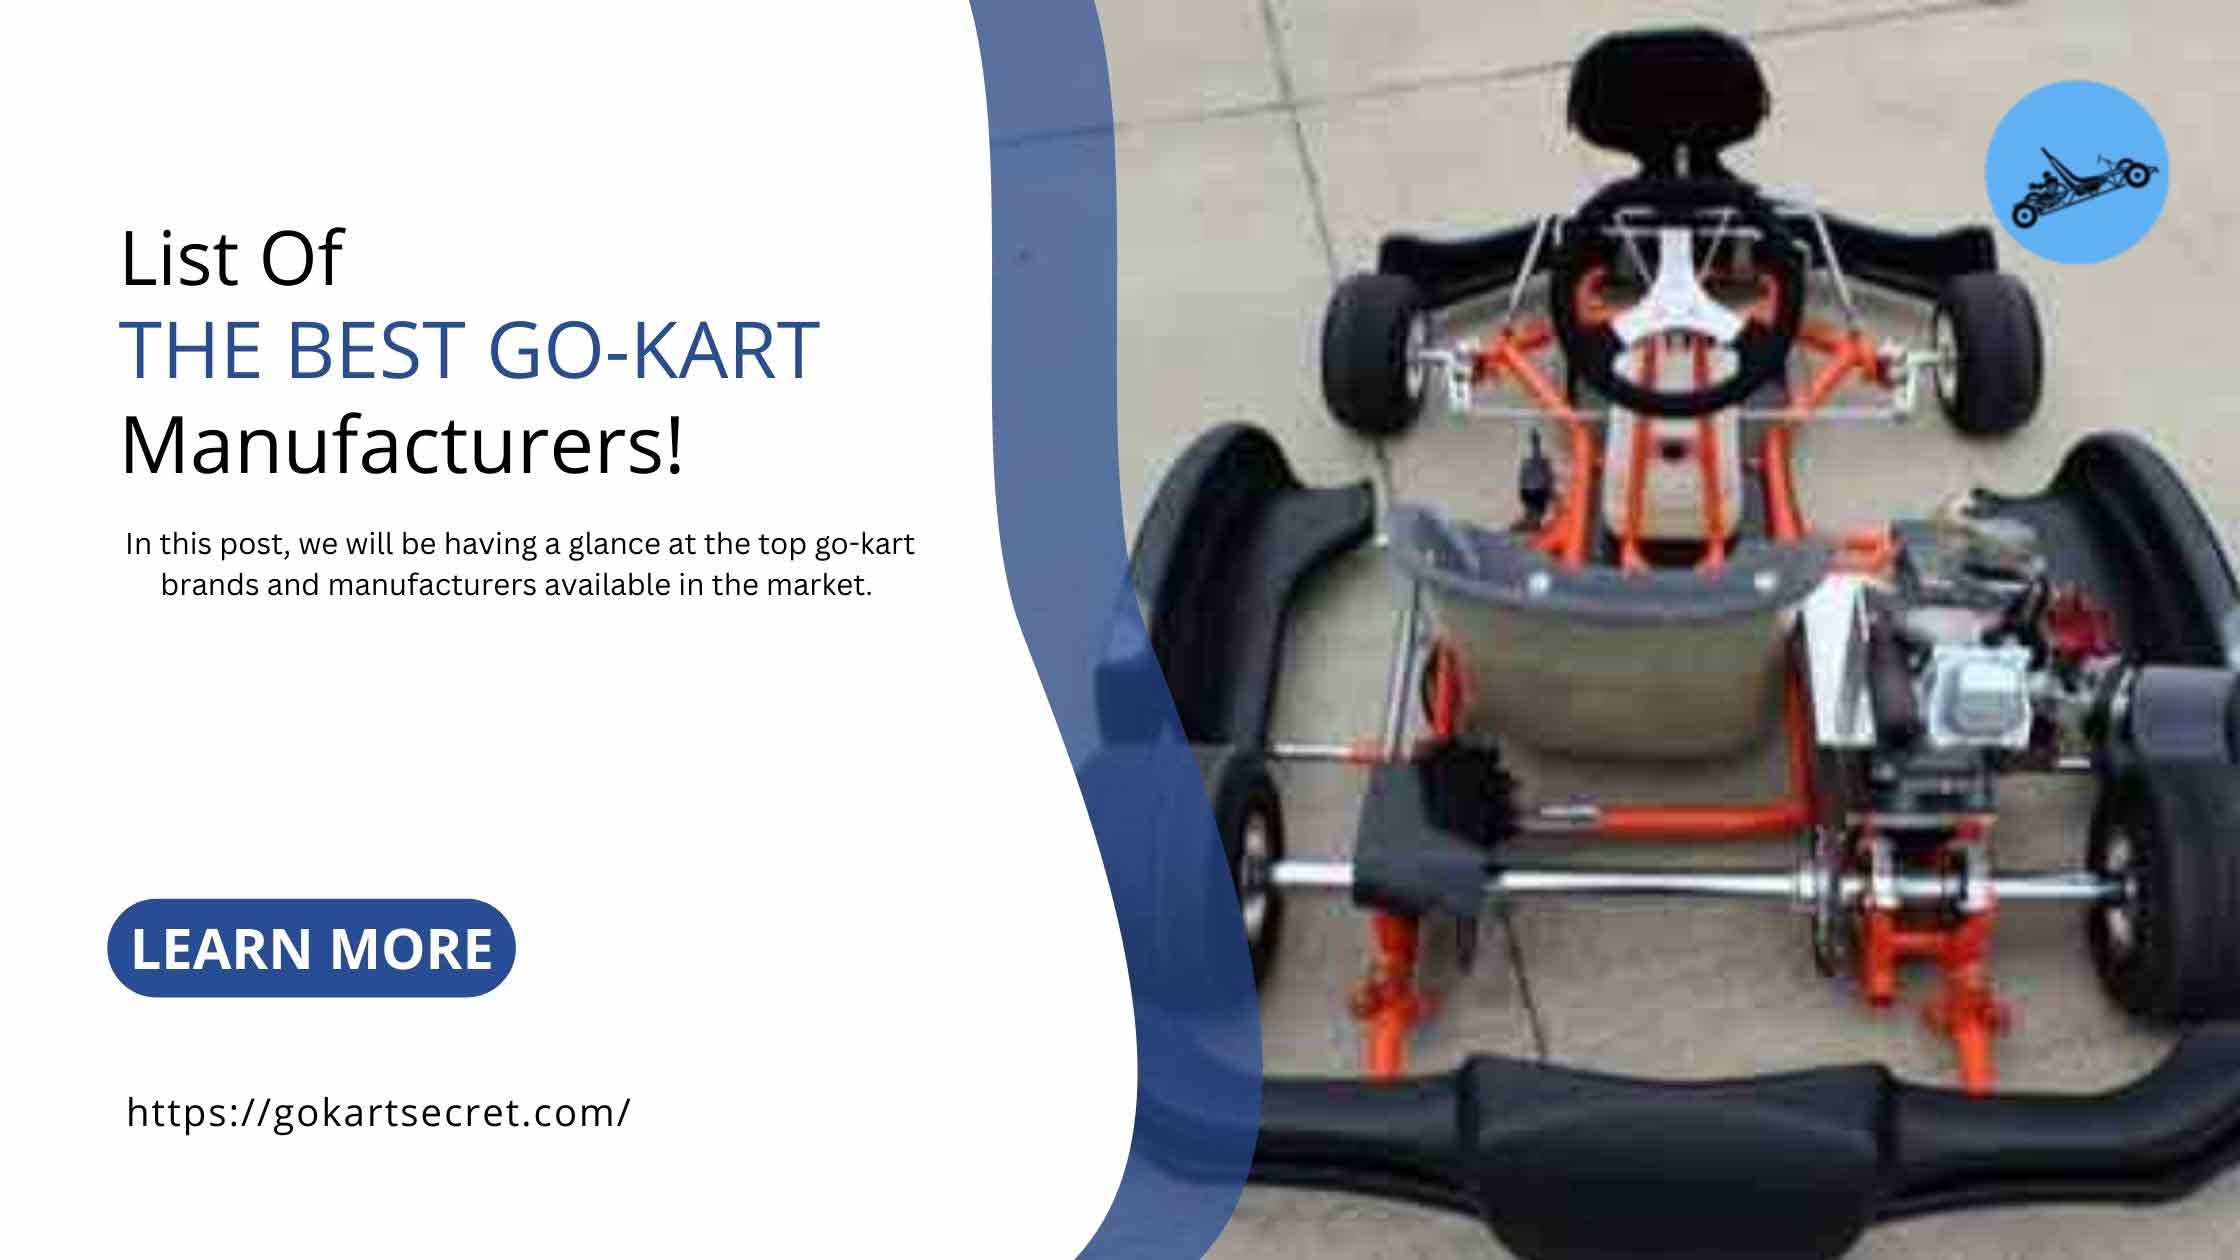 List Of The Best Go-Kart Manufacturers